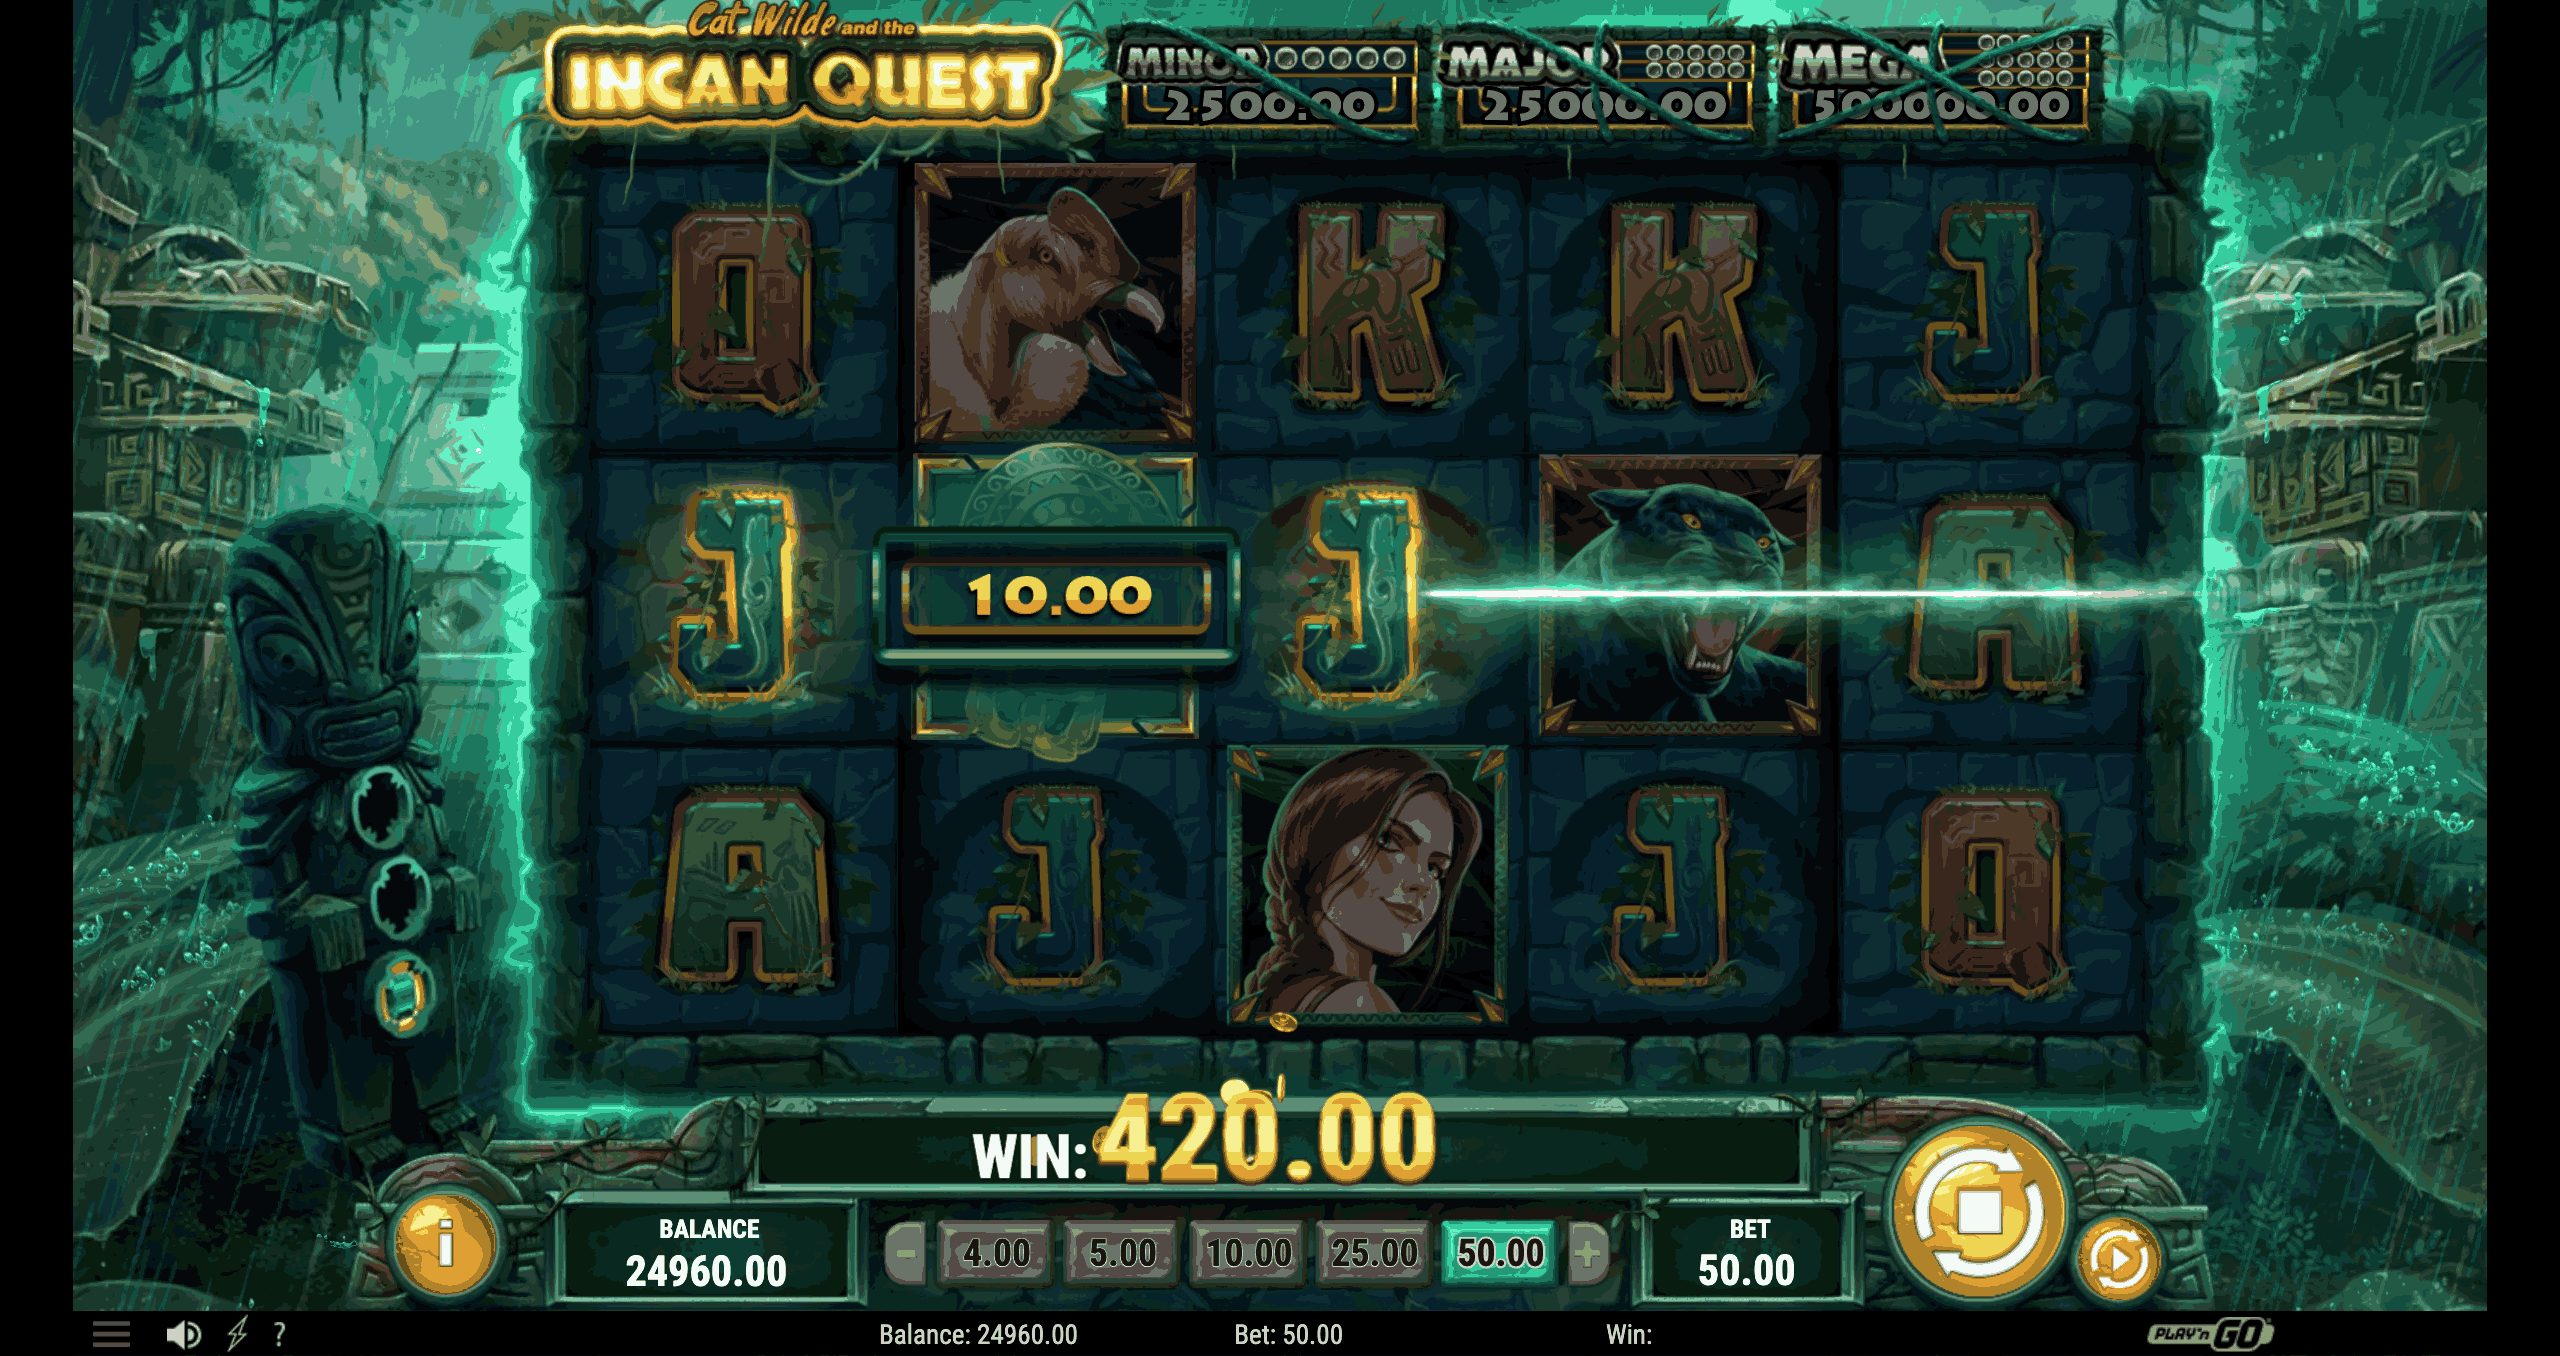 Cat Wilde and the Incan Quest Slot - 2